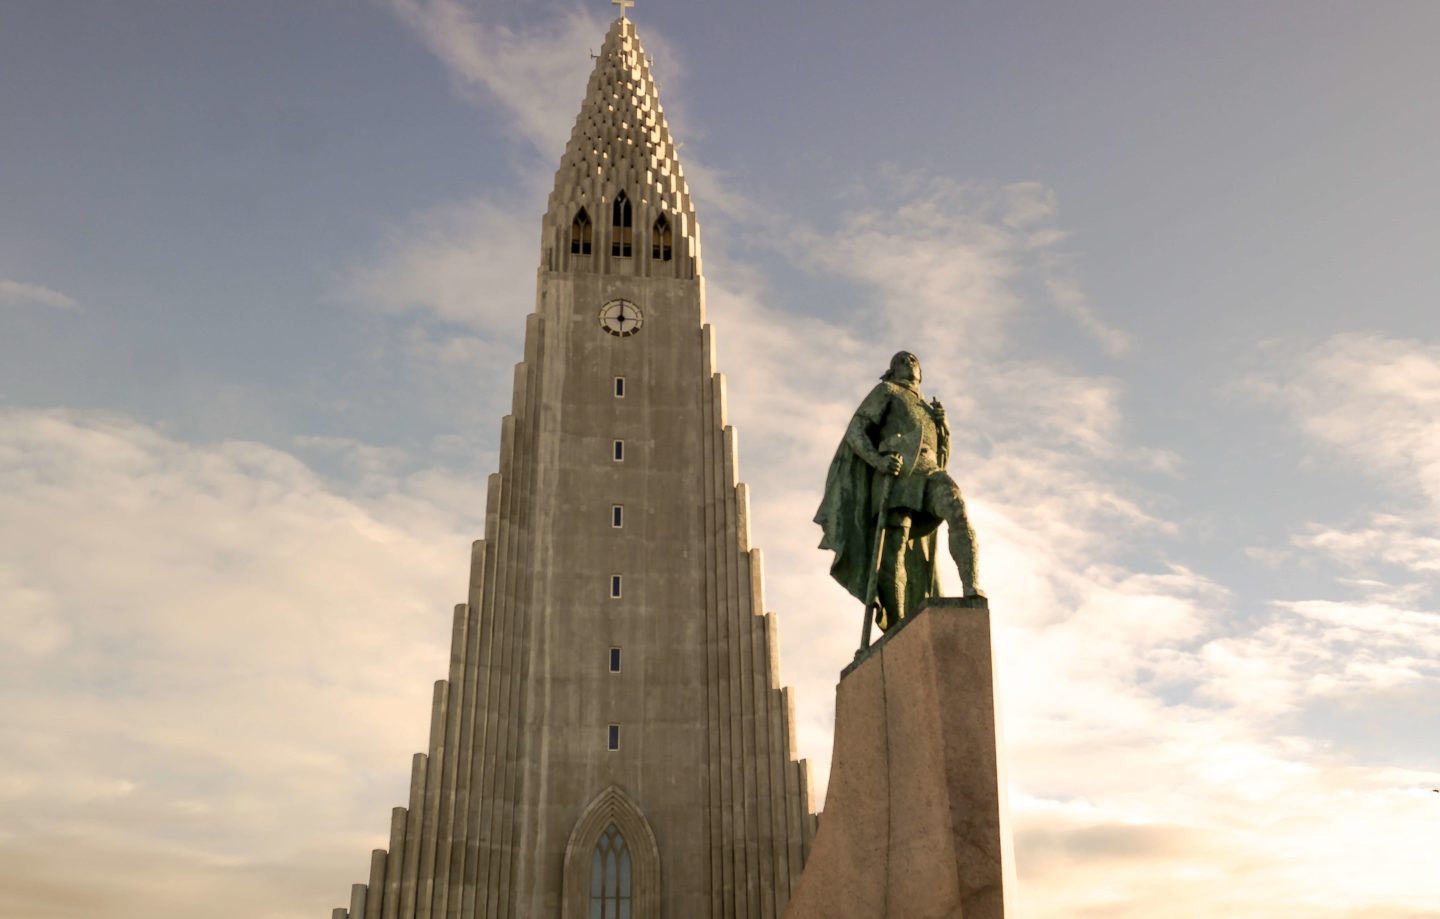 Views of the church in iceland